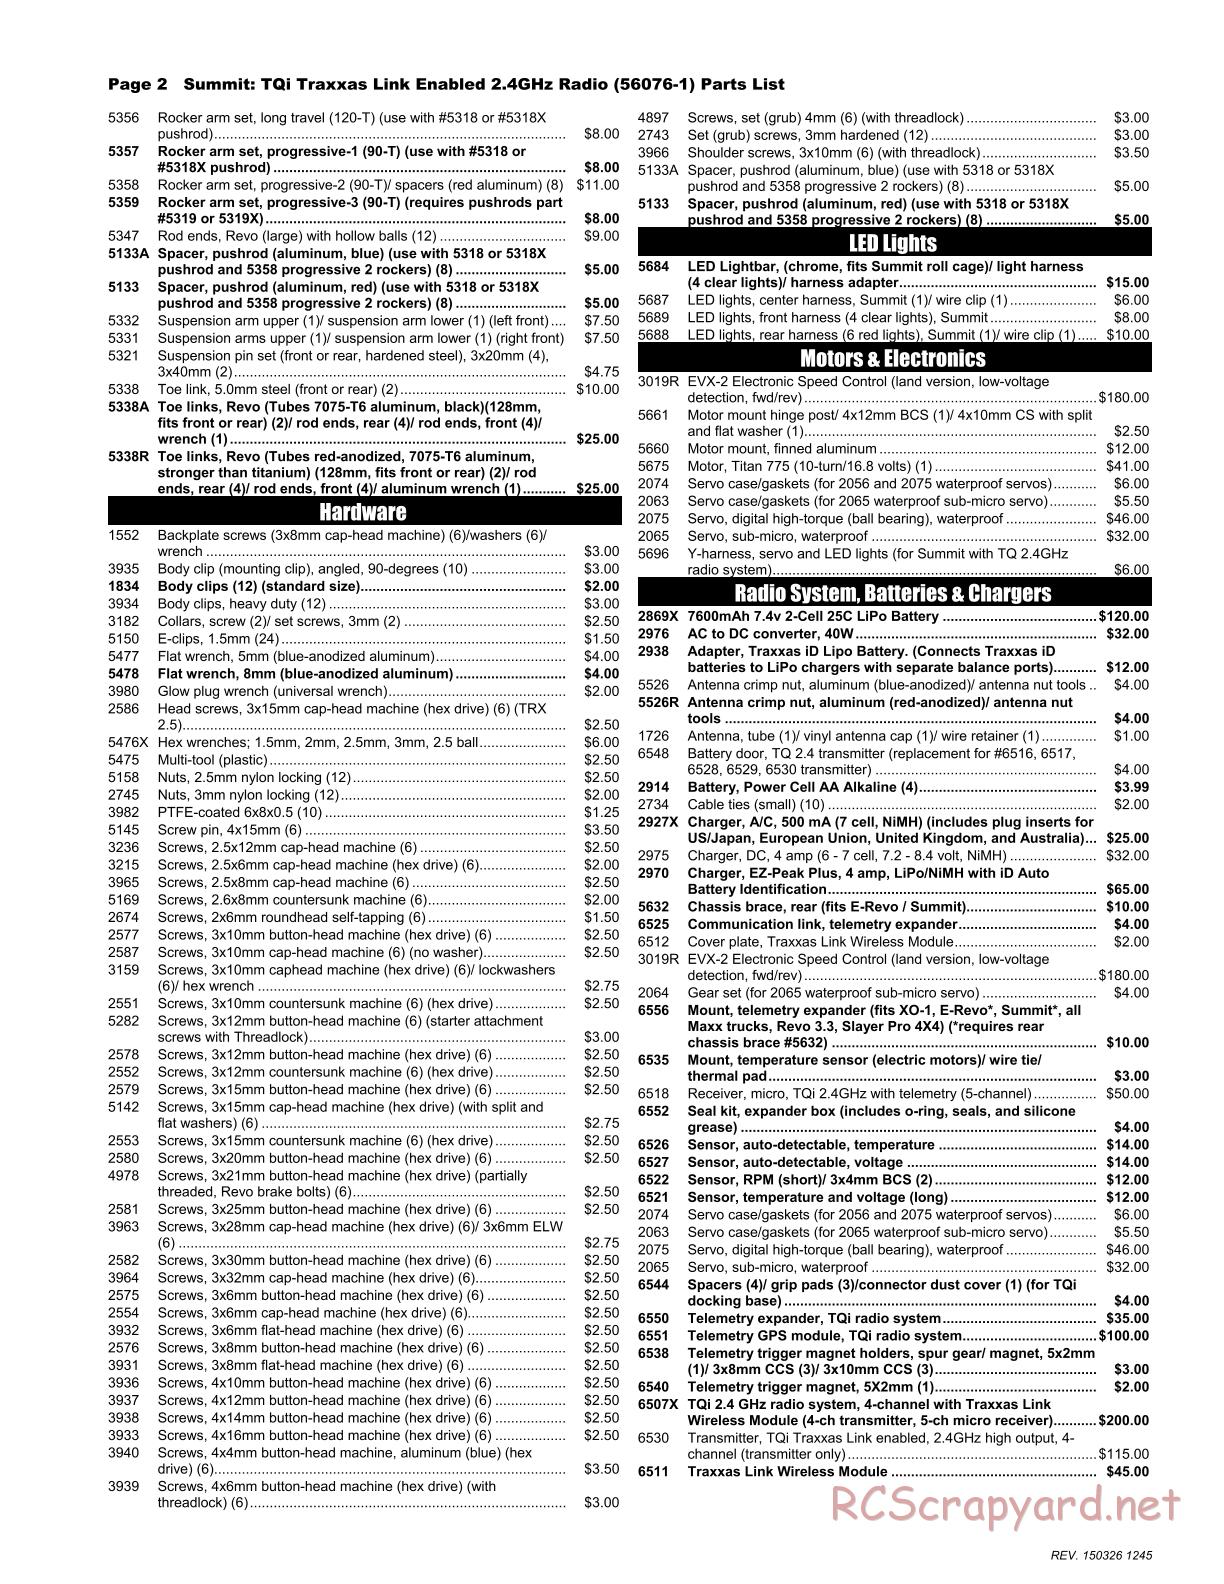 Traxxas - Summit (2015) - Parts List - Page 2